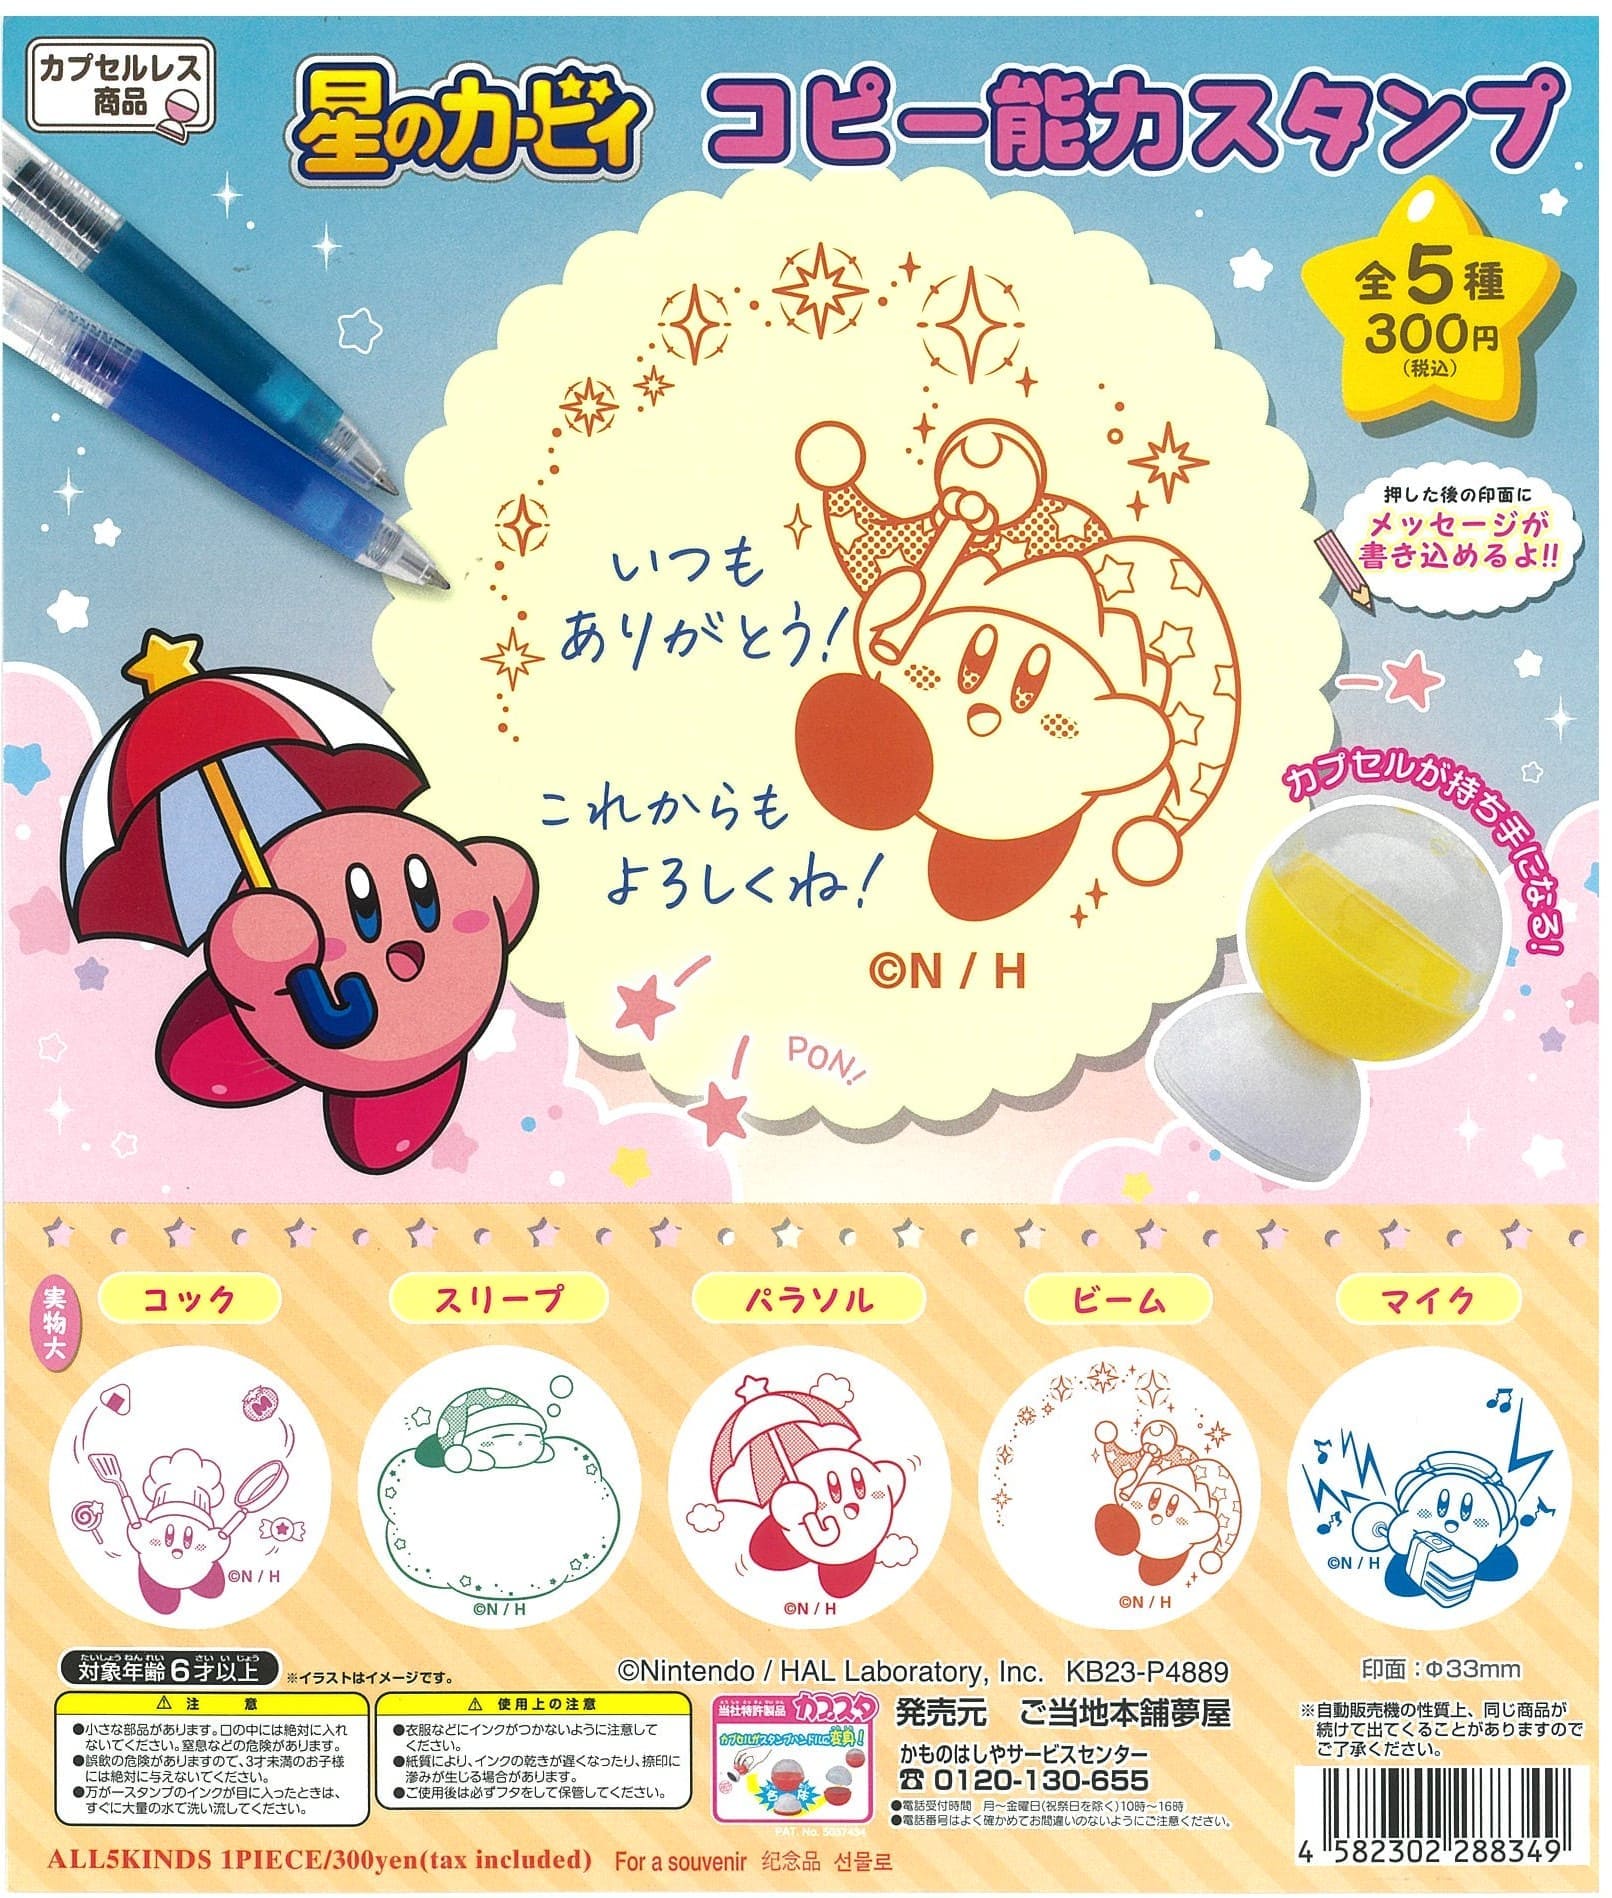 Nintendo CP2159 Kirby's Dream Land Copy Ability Stamp